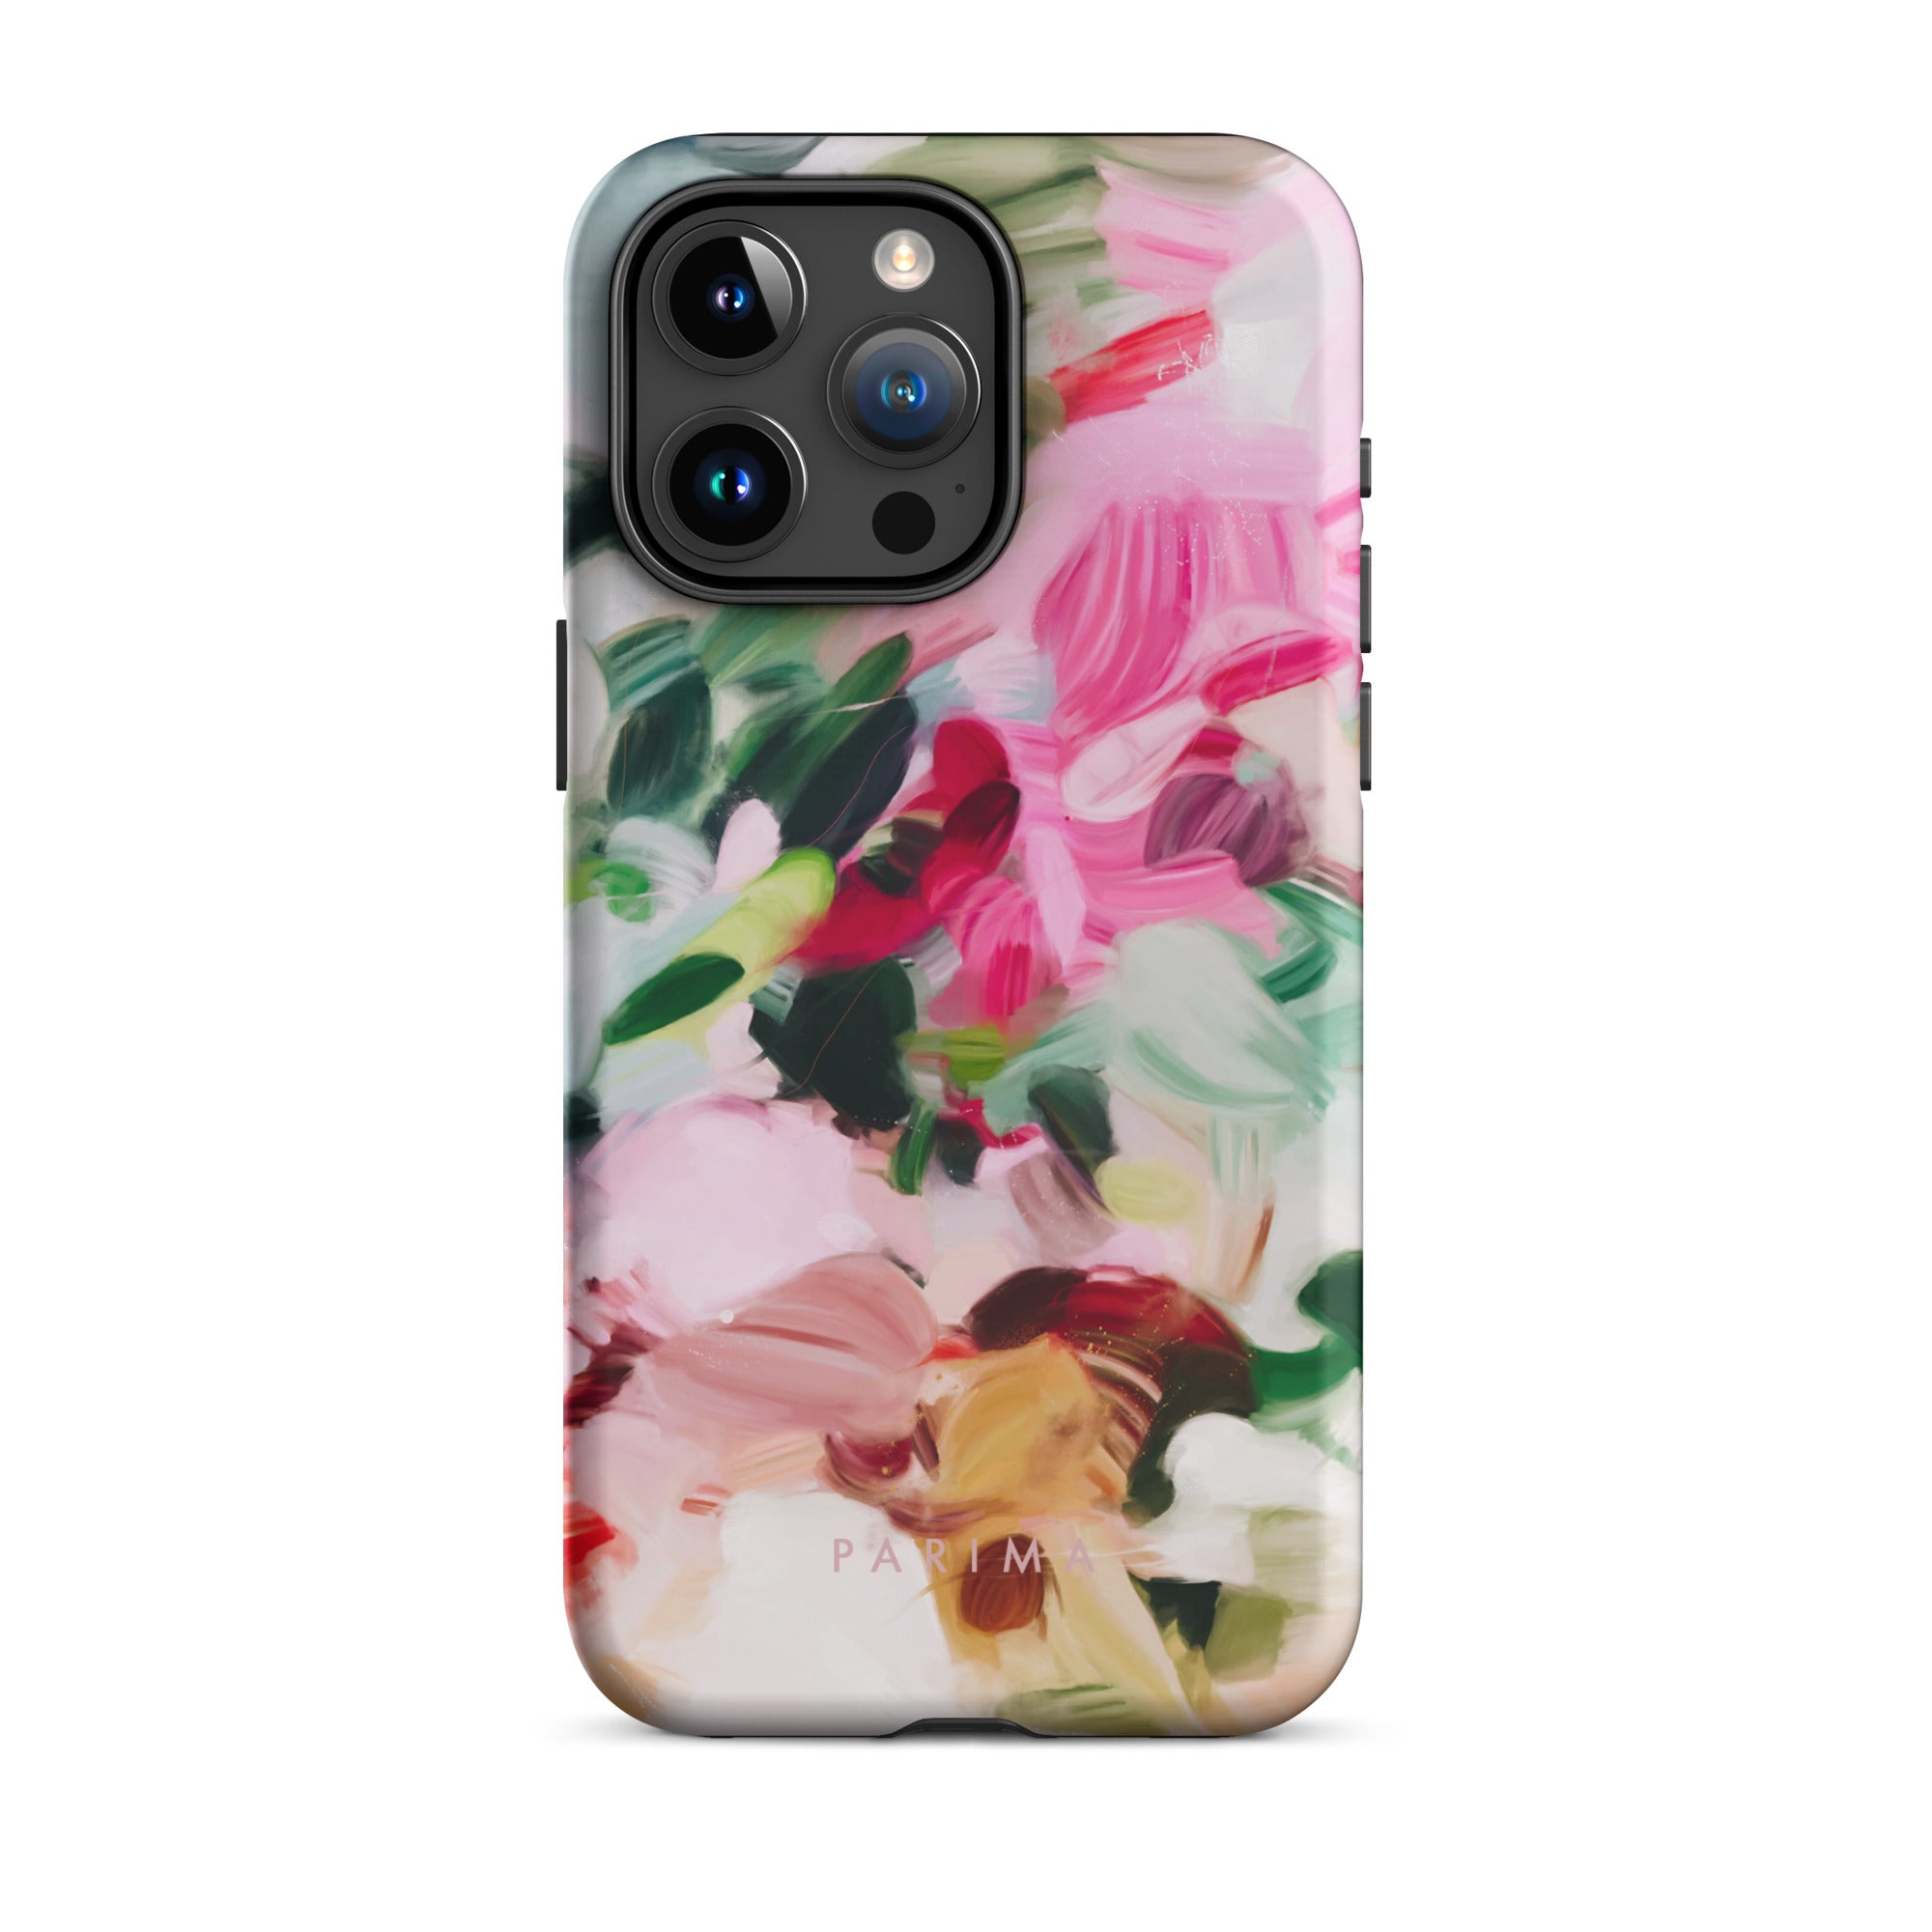 Bloom, pink and green abstract art - iPhone 15 Pro Max tough case by Parima Studio